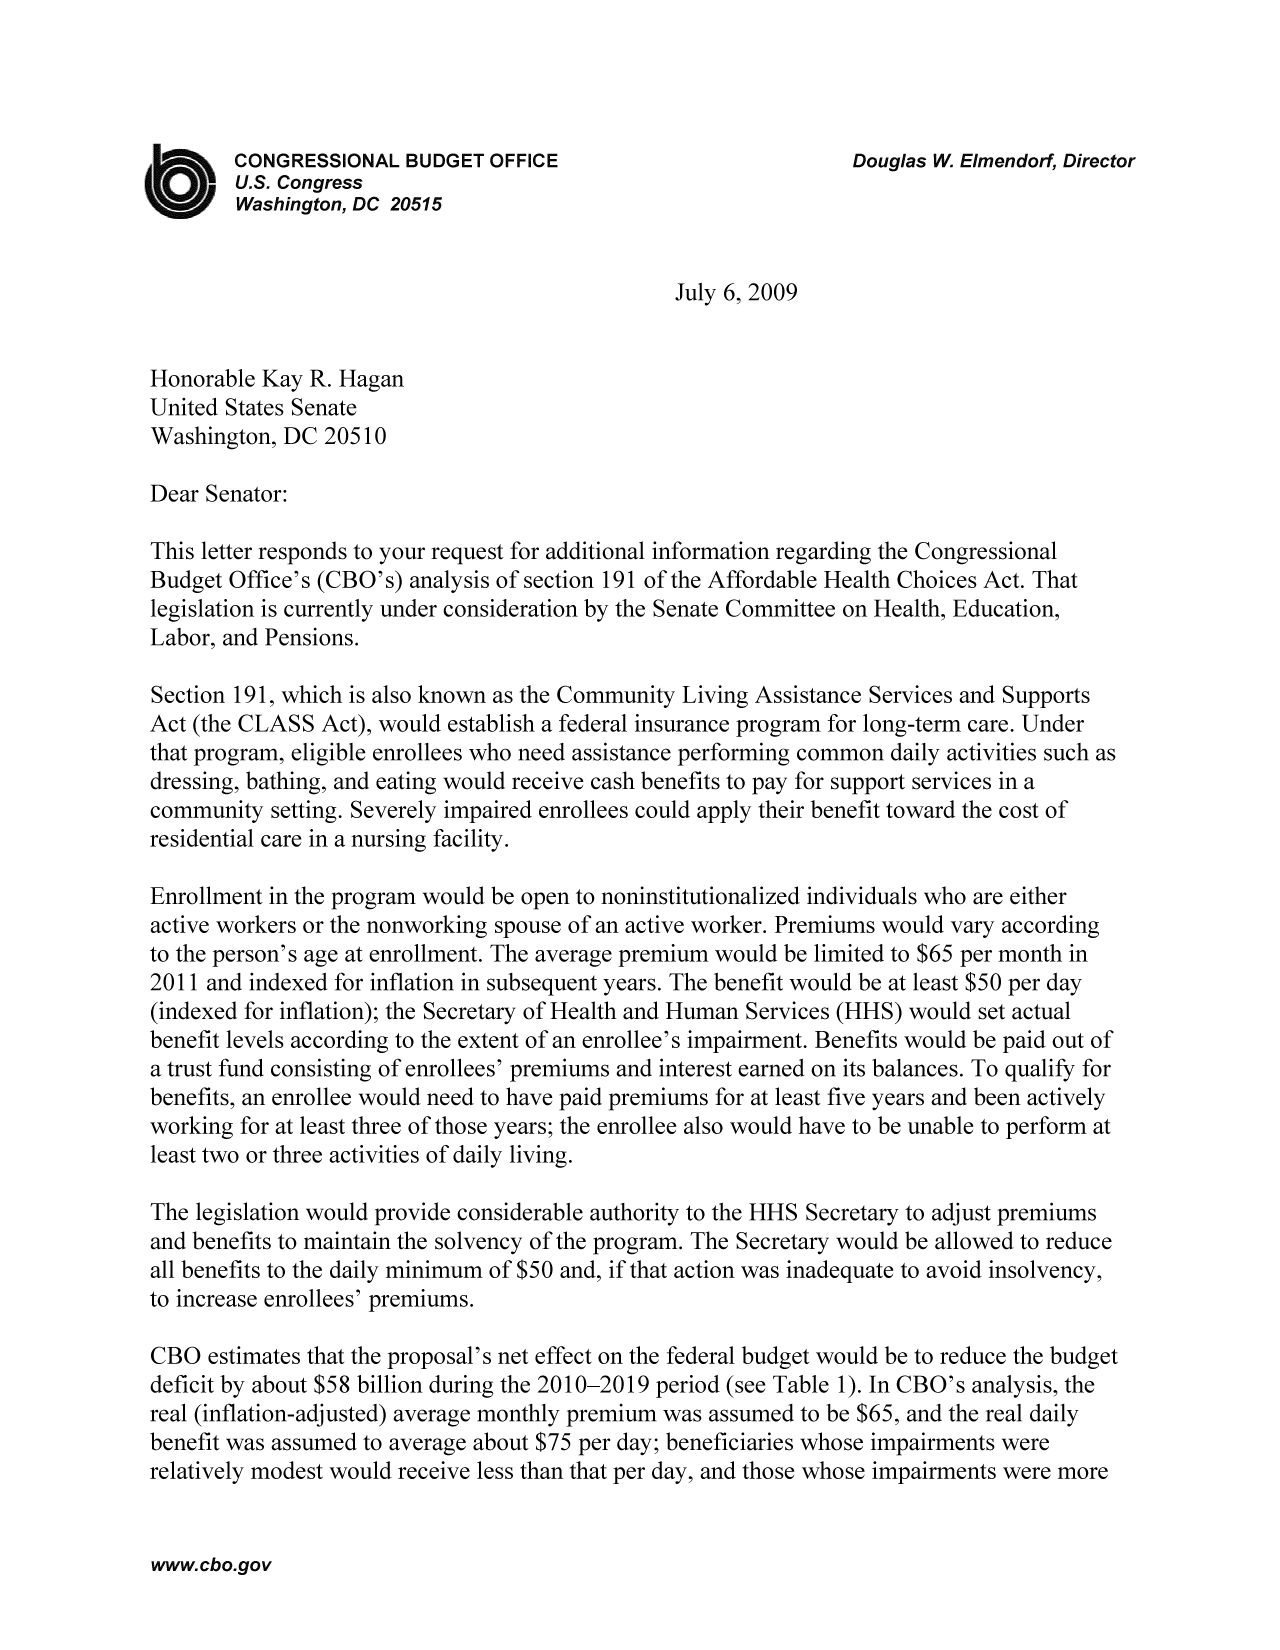 handle is hein.congrec/cbo9348 and id is 1 raw text is: CONGRESSIONAL BUDGET OFFICE                         Douglas W. Elmendorf, Director
U.S. Congress
Washington, DC 20515
July 6, 2009
Honorable Kay R. Hagan
United States Senate
Washington, DC 20510
Dear Senator:
This letter responds to your request for additional information regarding the Congressional
Budget Office's (CBO's) analysis of section 191 of the Affordable Health Choices Act. That
legislation is currently under consideration by the Senate Committee on Health, Education,
Labor, and Pensions.
Section 191, which is also known as the Community Living Assistance Services and Supports
Act (the CLASS Act), would establish a federal insurance program for long-term care. Under
that program, eligible enrollees who need assistance performing common daily activities such as
dressing, bathing, and eating would receive cash benefits to pay for support services in a
community setting. Severely impaired enrollees could apply their benefit toward the cost of
residential care in a nursing facility.
Enrollment in the program would be open to noninstitutionalized individuals who are either
active workers or the nonworking spouse of an active worker. Premiums would vary according
to the person's age at enrollment. The average premium would be limited to $65 per month in
2011 and indexed for inflation in subsequent years. The benefit would be at least $50 per day
(indexed for inflation); the Secretary of Health and Human Services (HHS) would set actual
benefit levels according to the extent of an enrollee's impairment. Benefits would be paid out of
a trust fund consisting of enrollees' premiums and interest earned on its balances. To qualify for
benefits, an enrollee would need to have paid premiums for at least five years and been actively
working for at least three of those years; the enrollee also would have to be unable to perform at
least two or three activities of daily living.
The legislation would provide considerable authority to the HHS Secretary to adjust premiums
and benefits to maintain the solvency of the program. The Secretary would be allowed to reduce
all benefits to the daily minimum of $50 and, if that action was inadequate to avoid insolvency,
to increase enrollees' premiums.
CBO estimates that the proposal's net effect on the federal budget would be to reduce the budget
deficit by about $58 billion during the 2010-2019 period (see Table 1). In CBO's analysis, the
real (inflation-adjusted) average monthly premium was assumed to be $65, and the real daily
benefit was assumed to average about $75 per day; beneficiaries whose impairments were
relatively modest would receive less than that per day, and those whose impairments were more

www.cbo.gov


